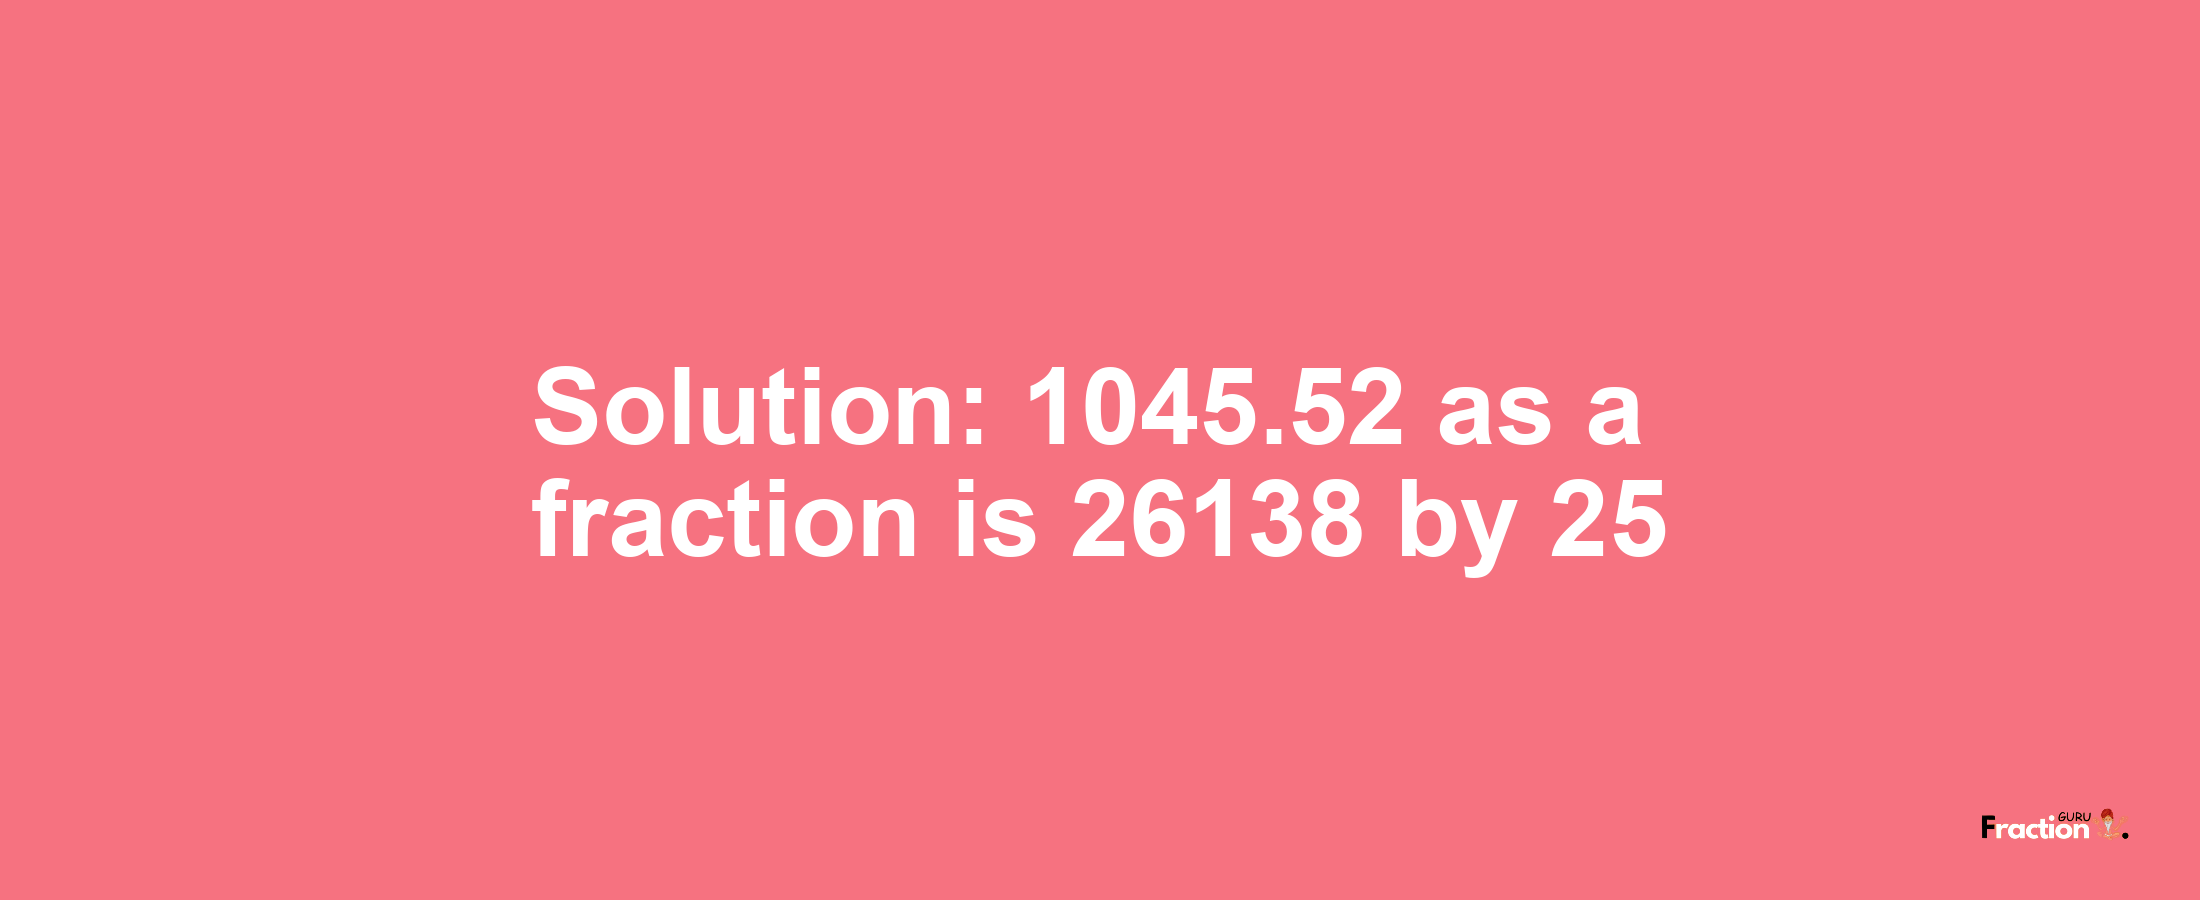 Solution:1045.52 as a fraction is 26138/25